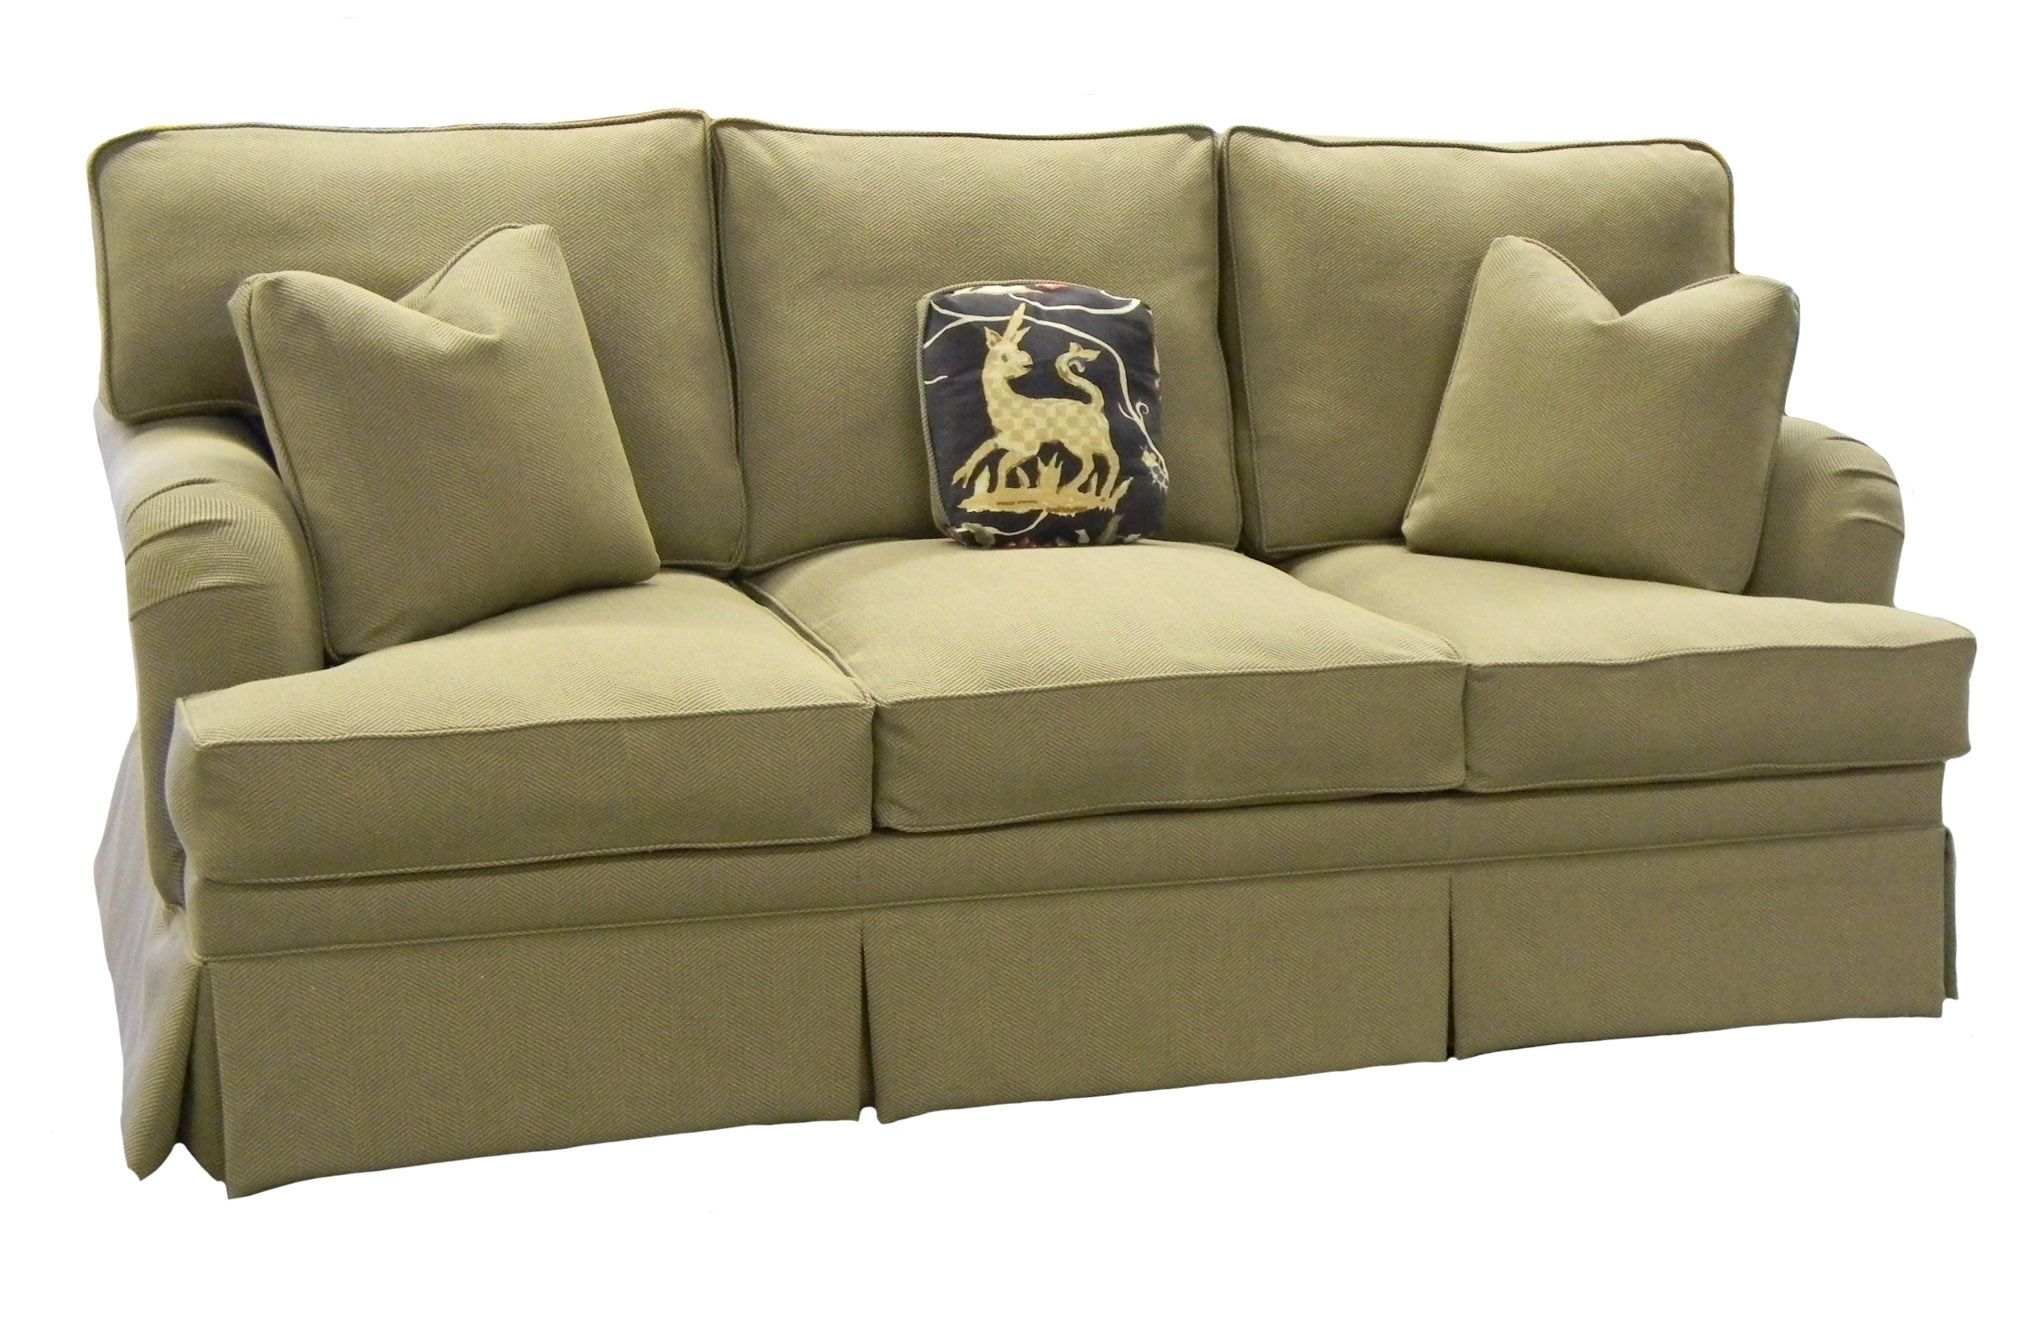 Kingston Ontario Sectional Sofas With Widely Used Sleeper Sofas Made Usa Nc Free Shipping Carolina Chair (View 17 of 20)